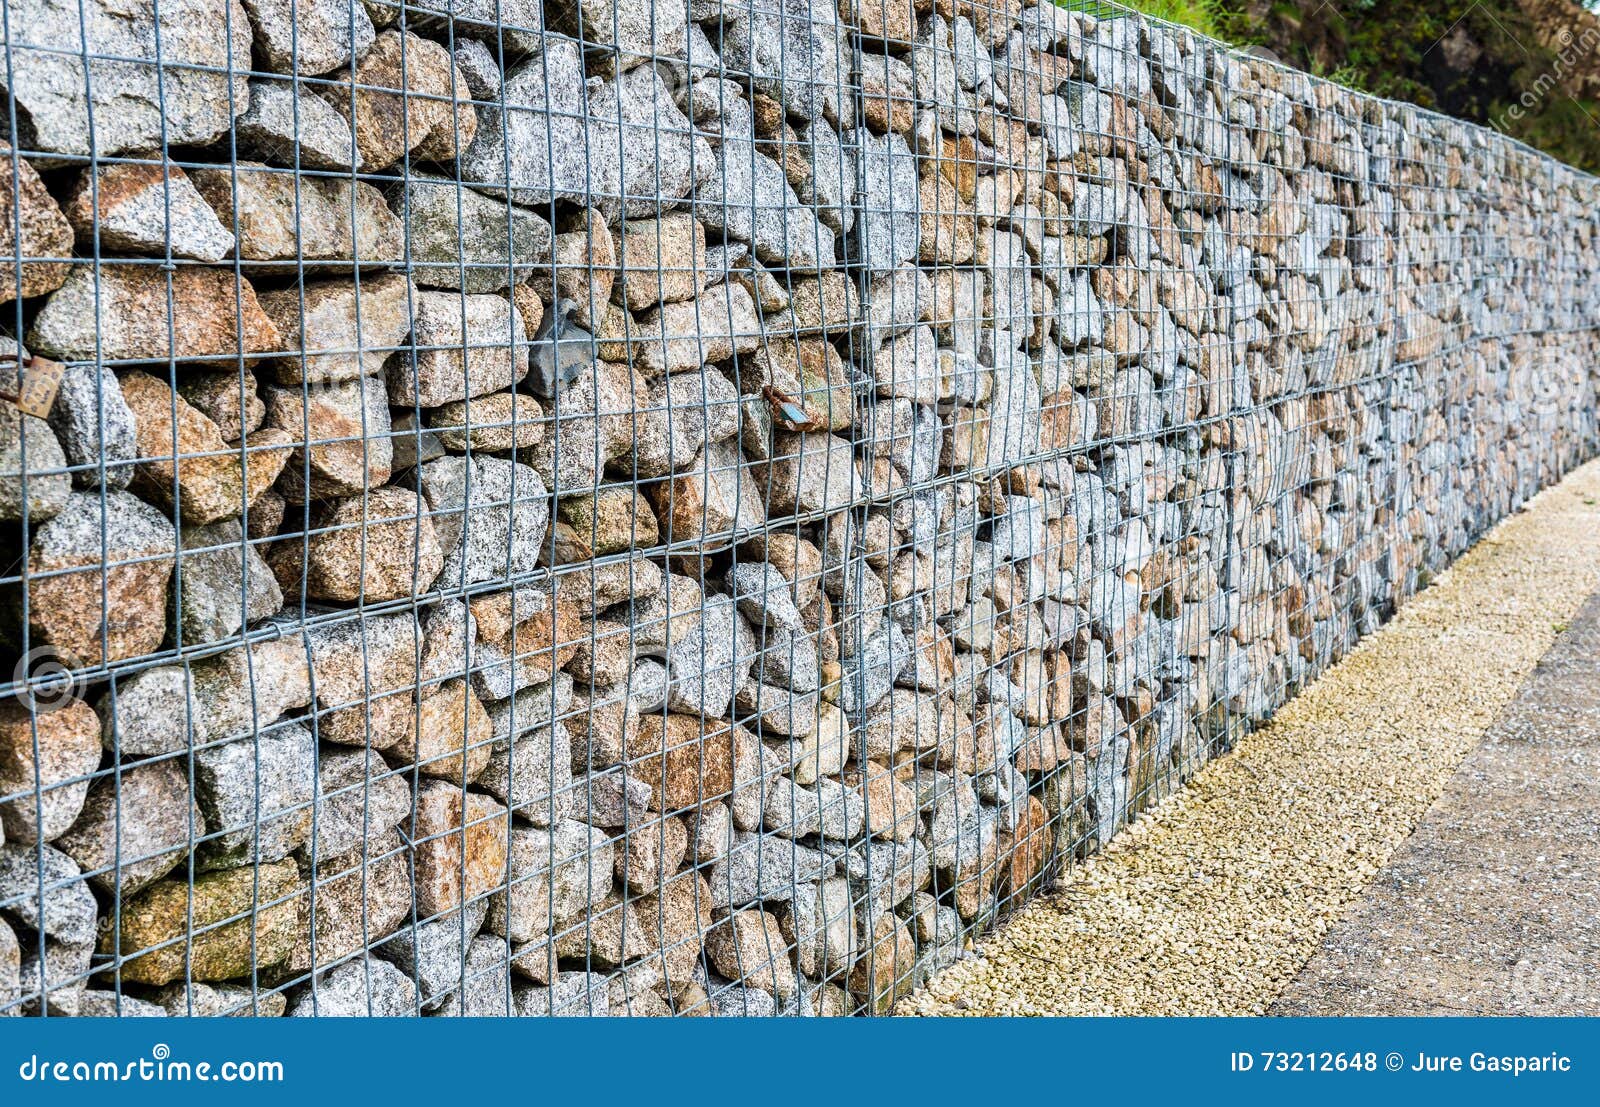 wire gabion rock fence. metal cage filled with rocks.